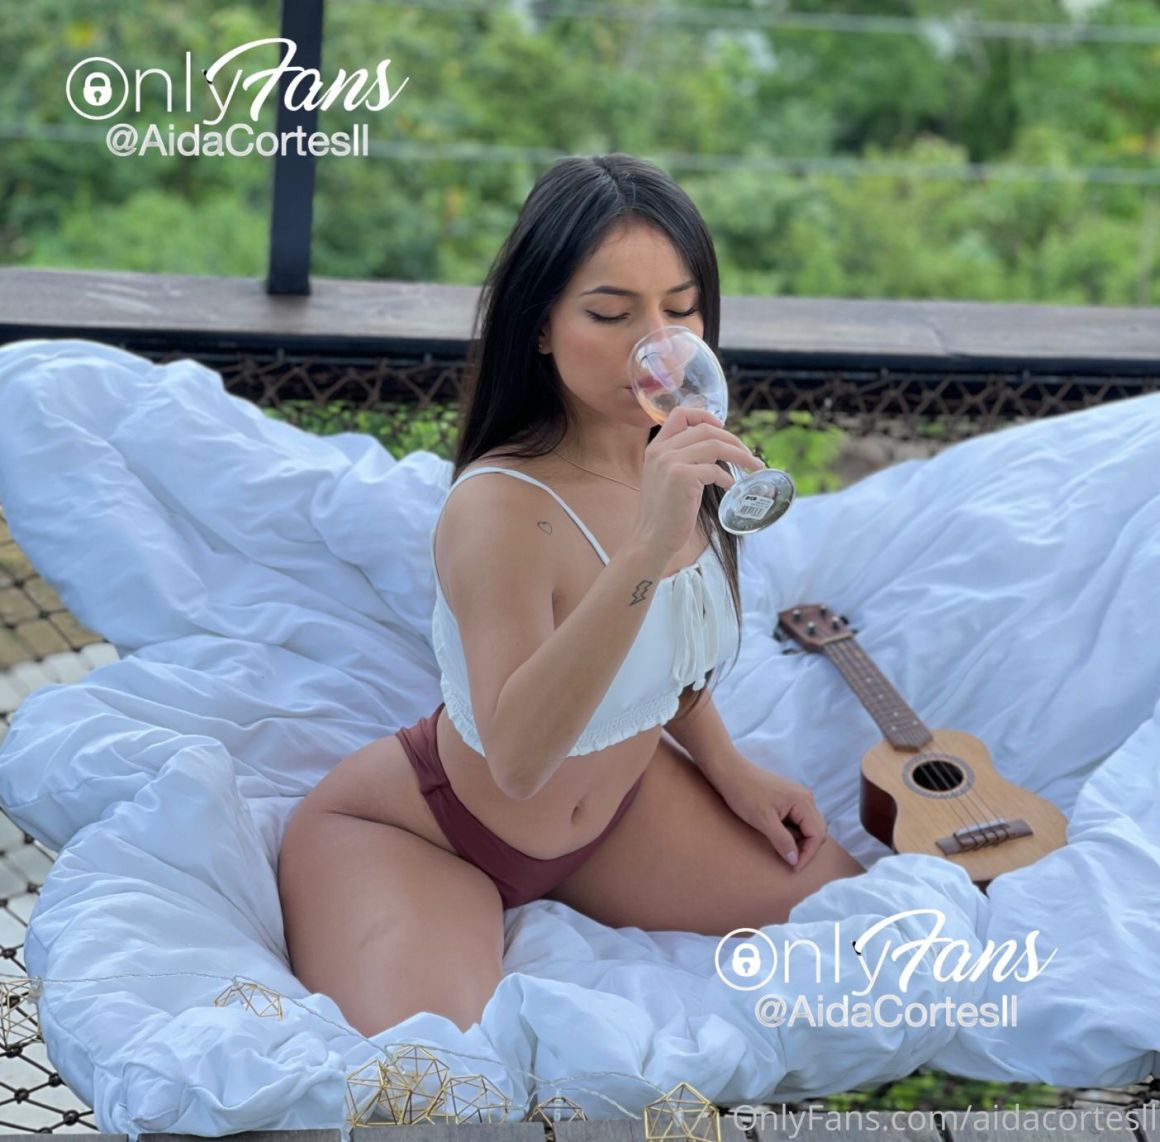 1634911858 66 AsianOnlyfans 062 205 20211022